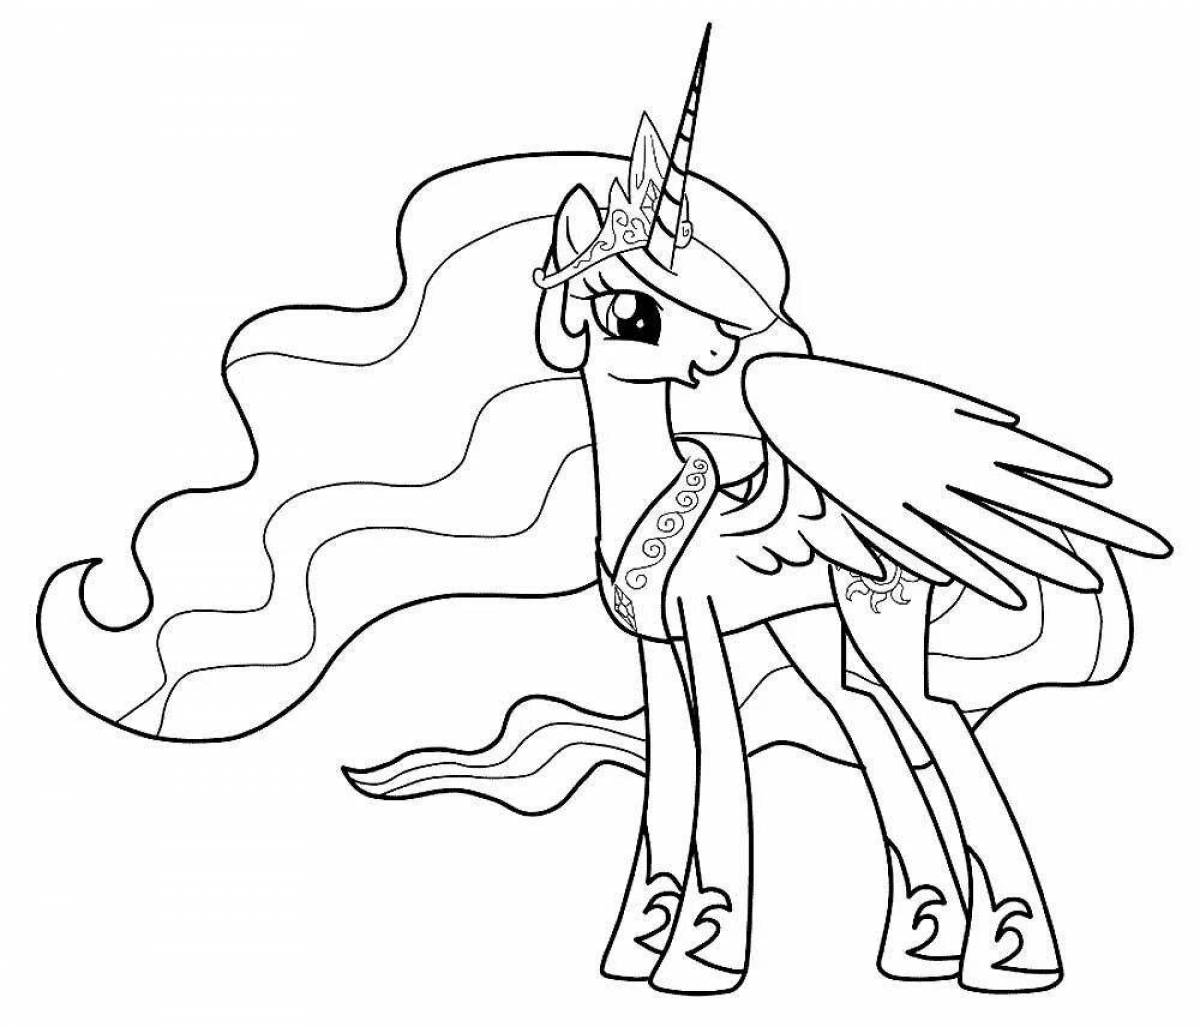 Adorable celestia coloring page for kids